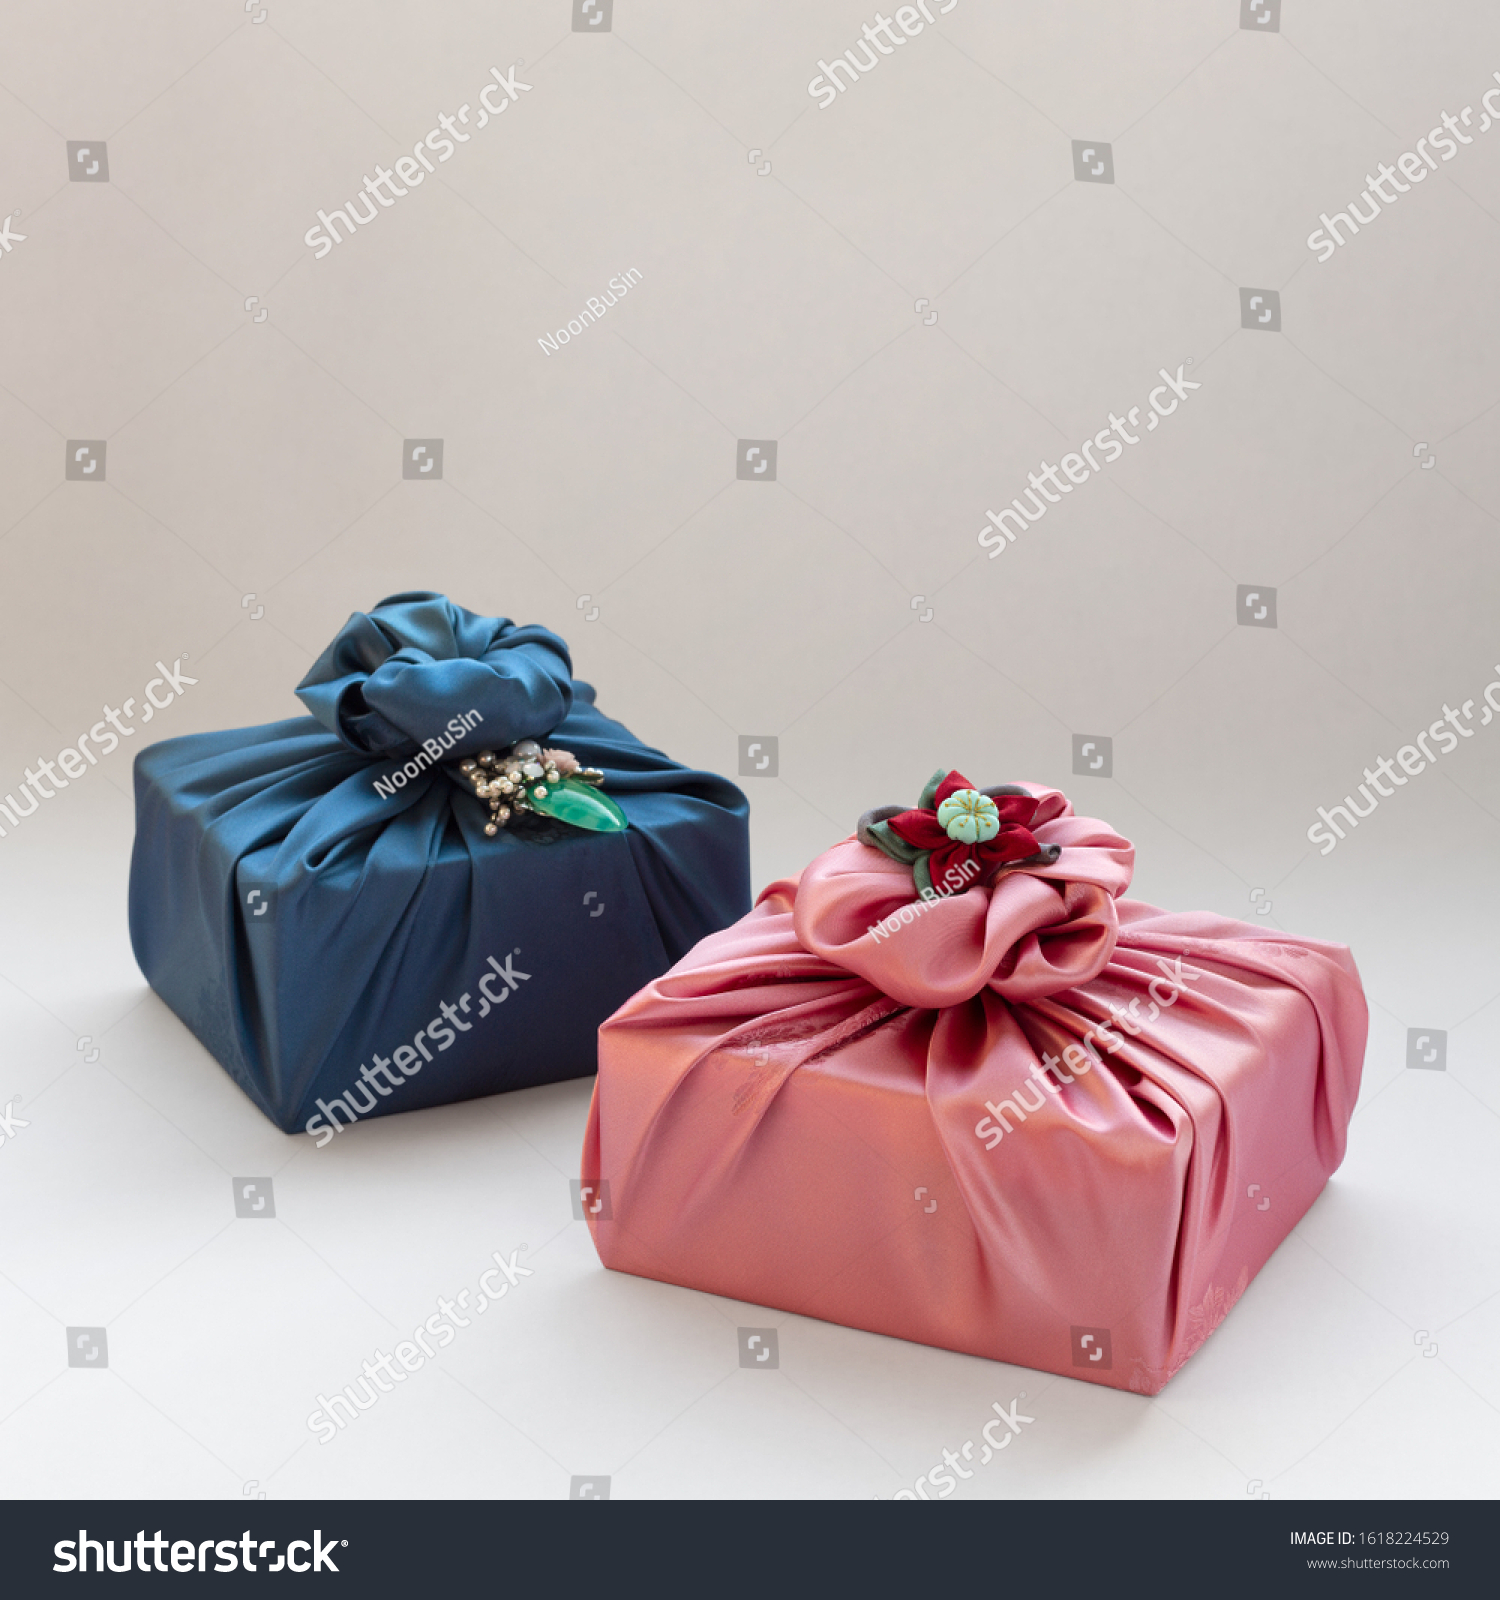 Korean traditional gift packaging cloth made of silk(bojagi) and ornaments with copy space. Isolated on white background. #1618224529